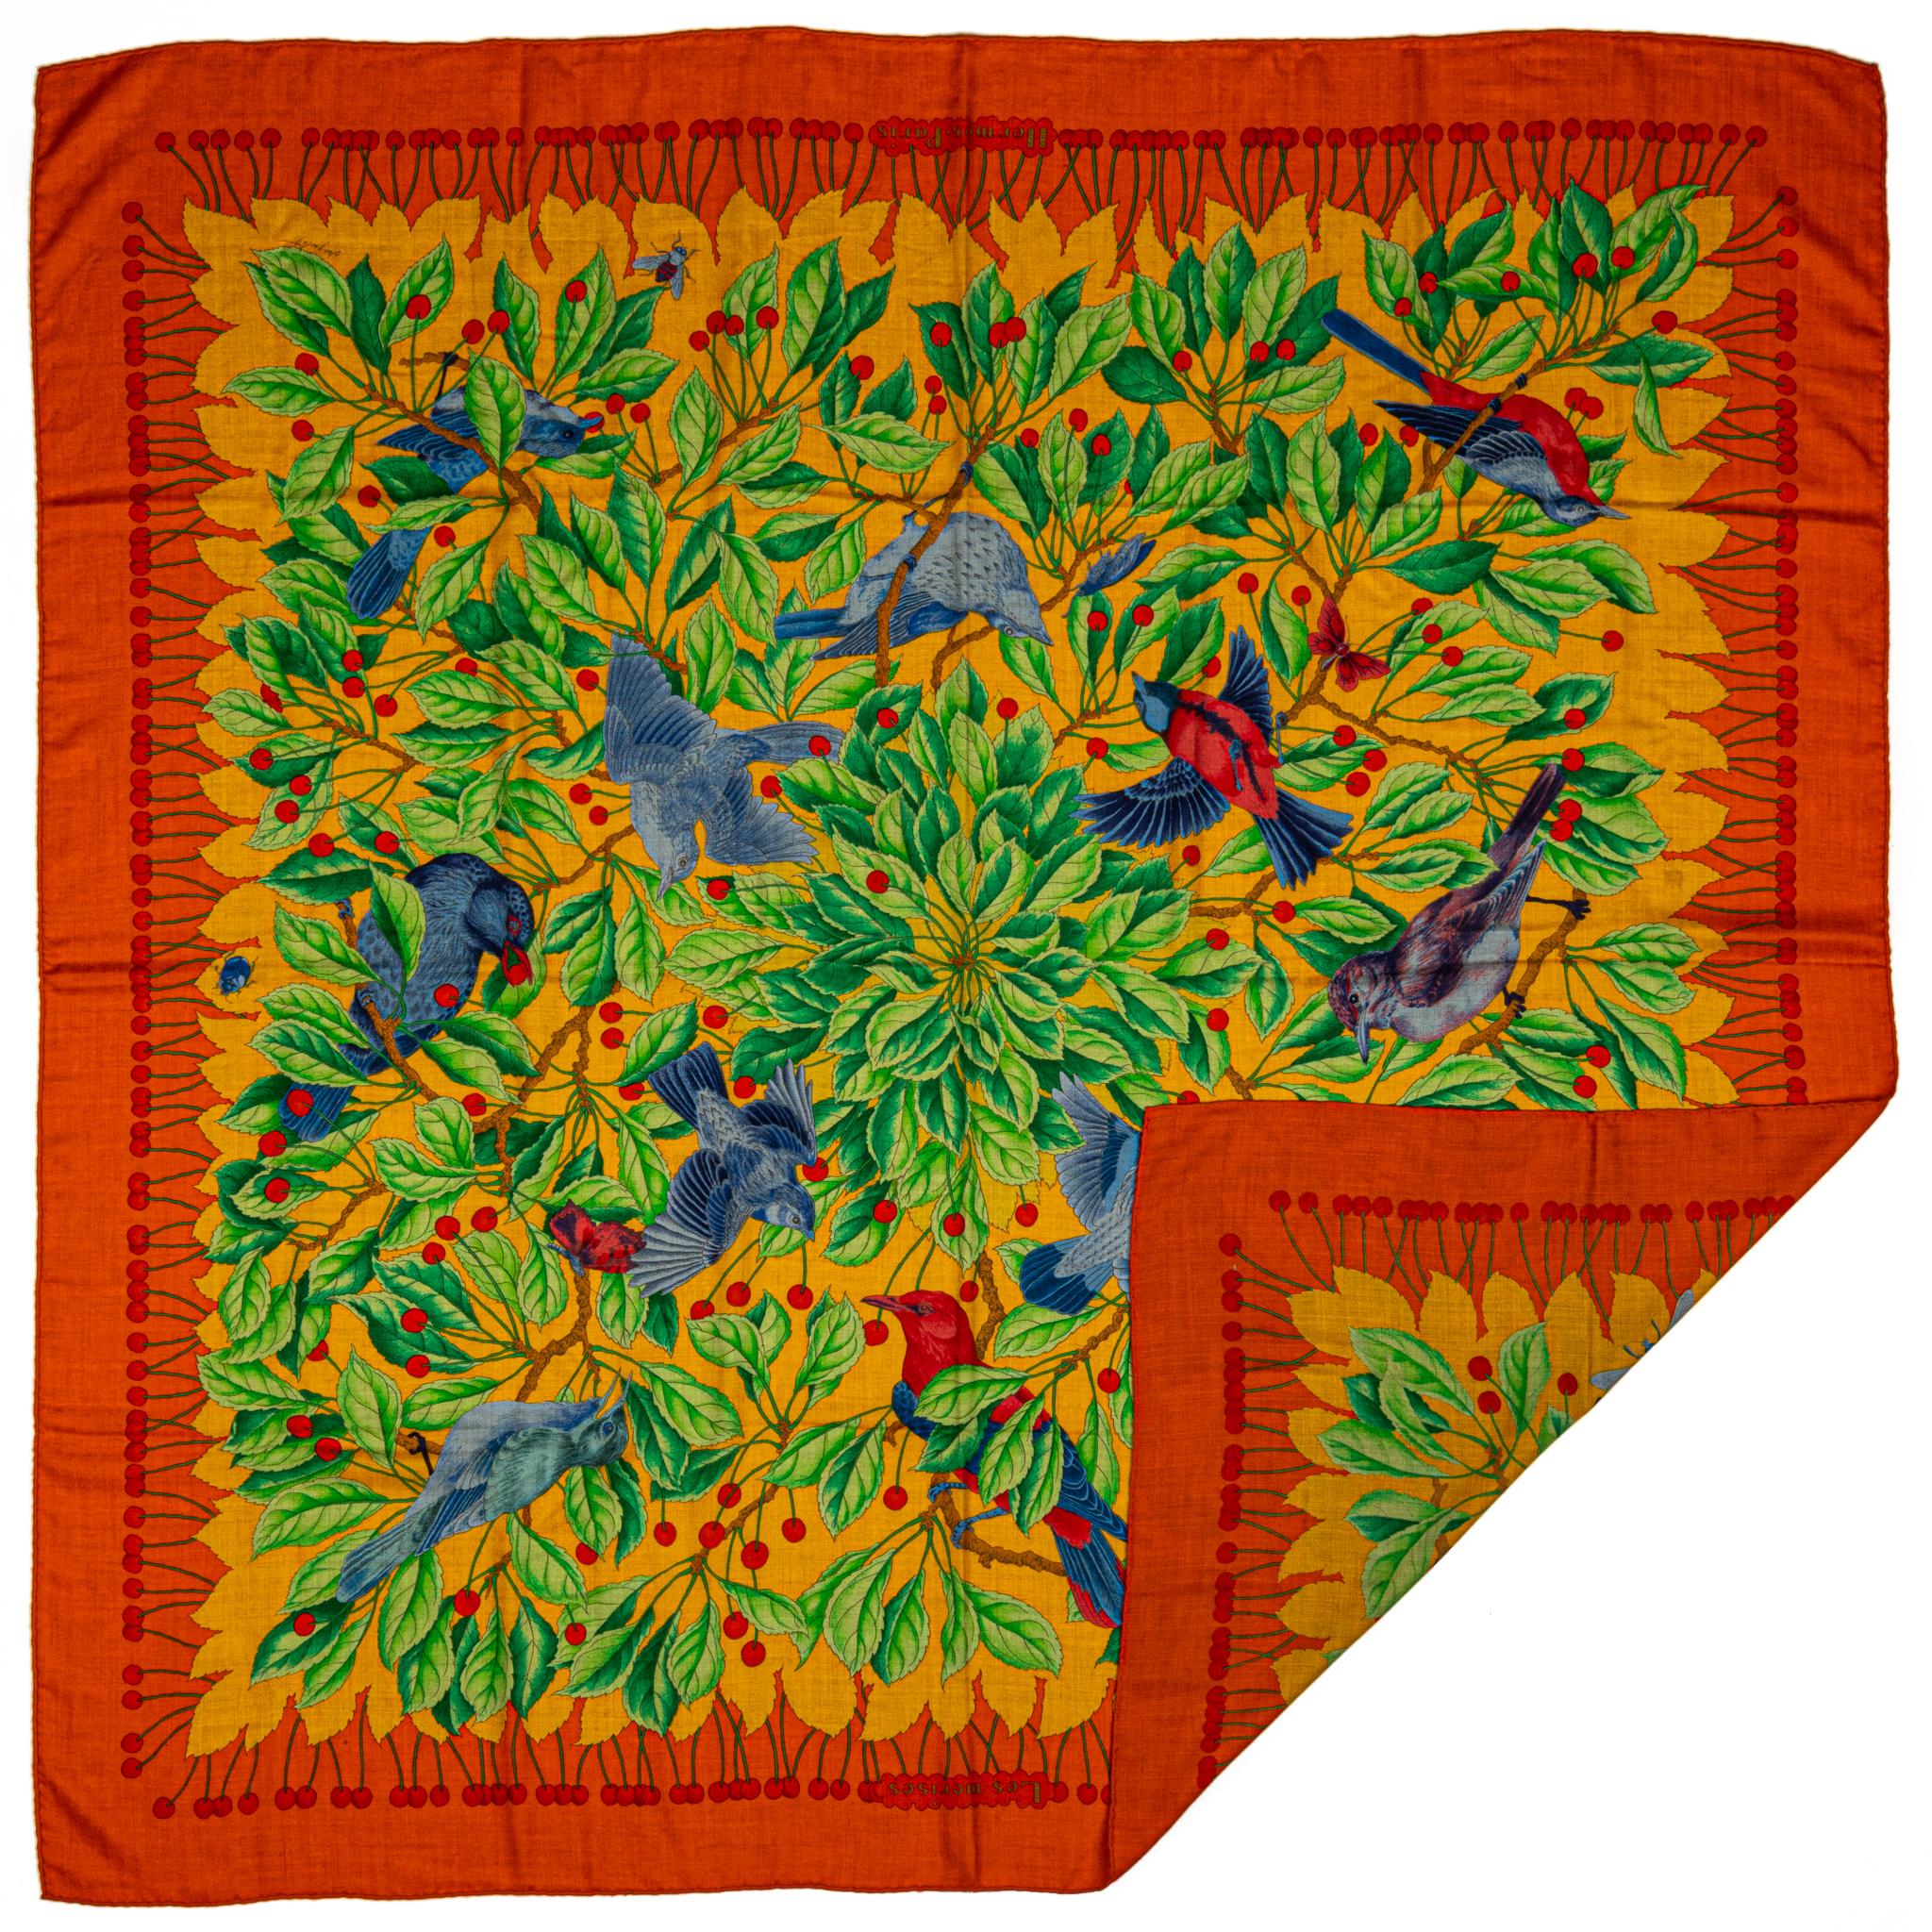 Hermès preowned orange and green shawl with birds design.65% cashmere 35% silk oversize shawl/scarf. Hand-rolled edges. Does not include box.